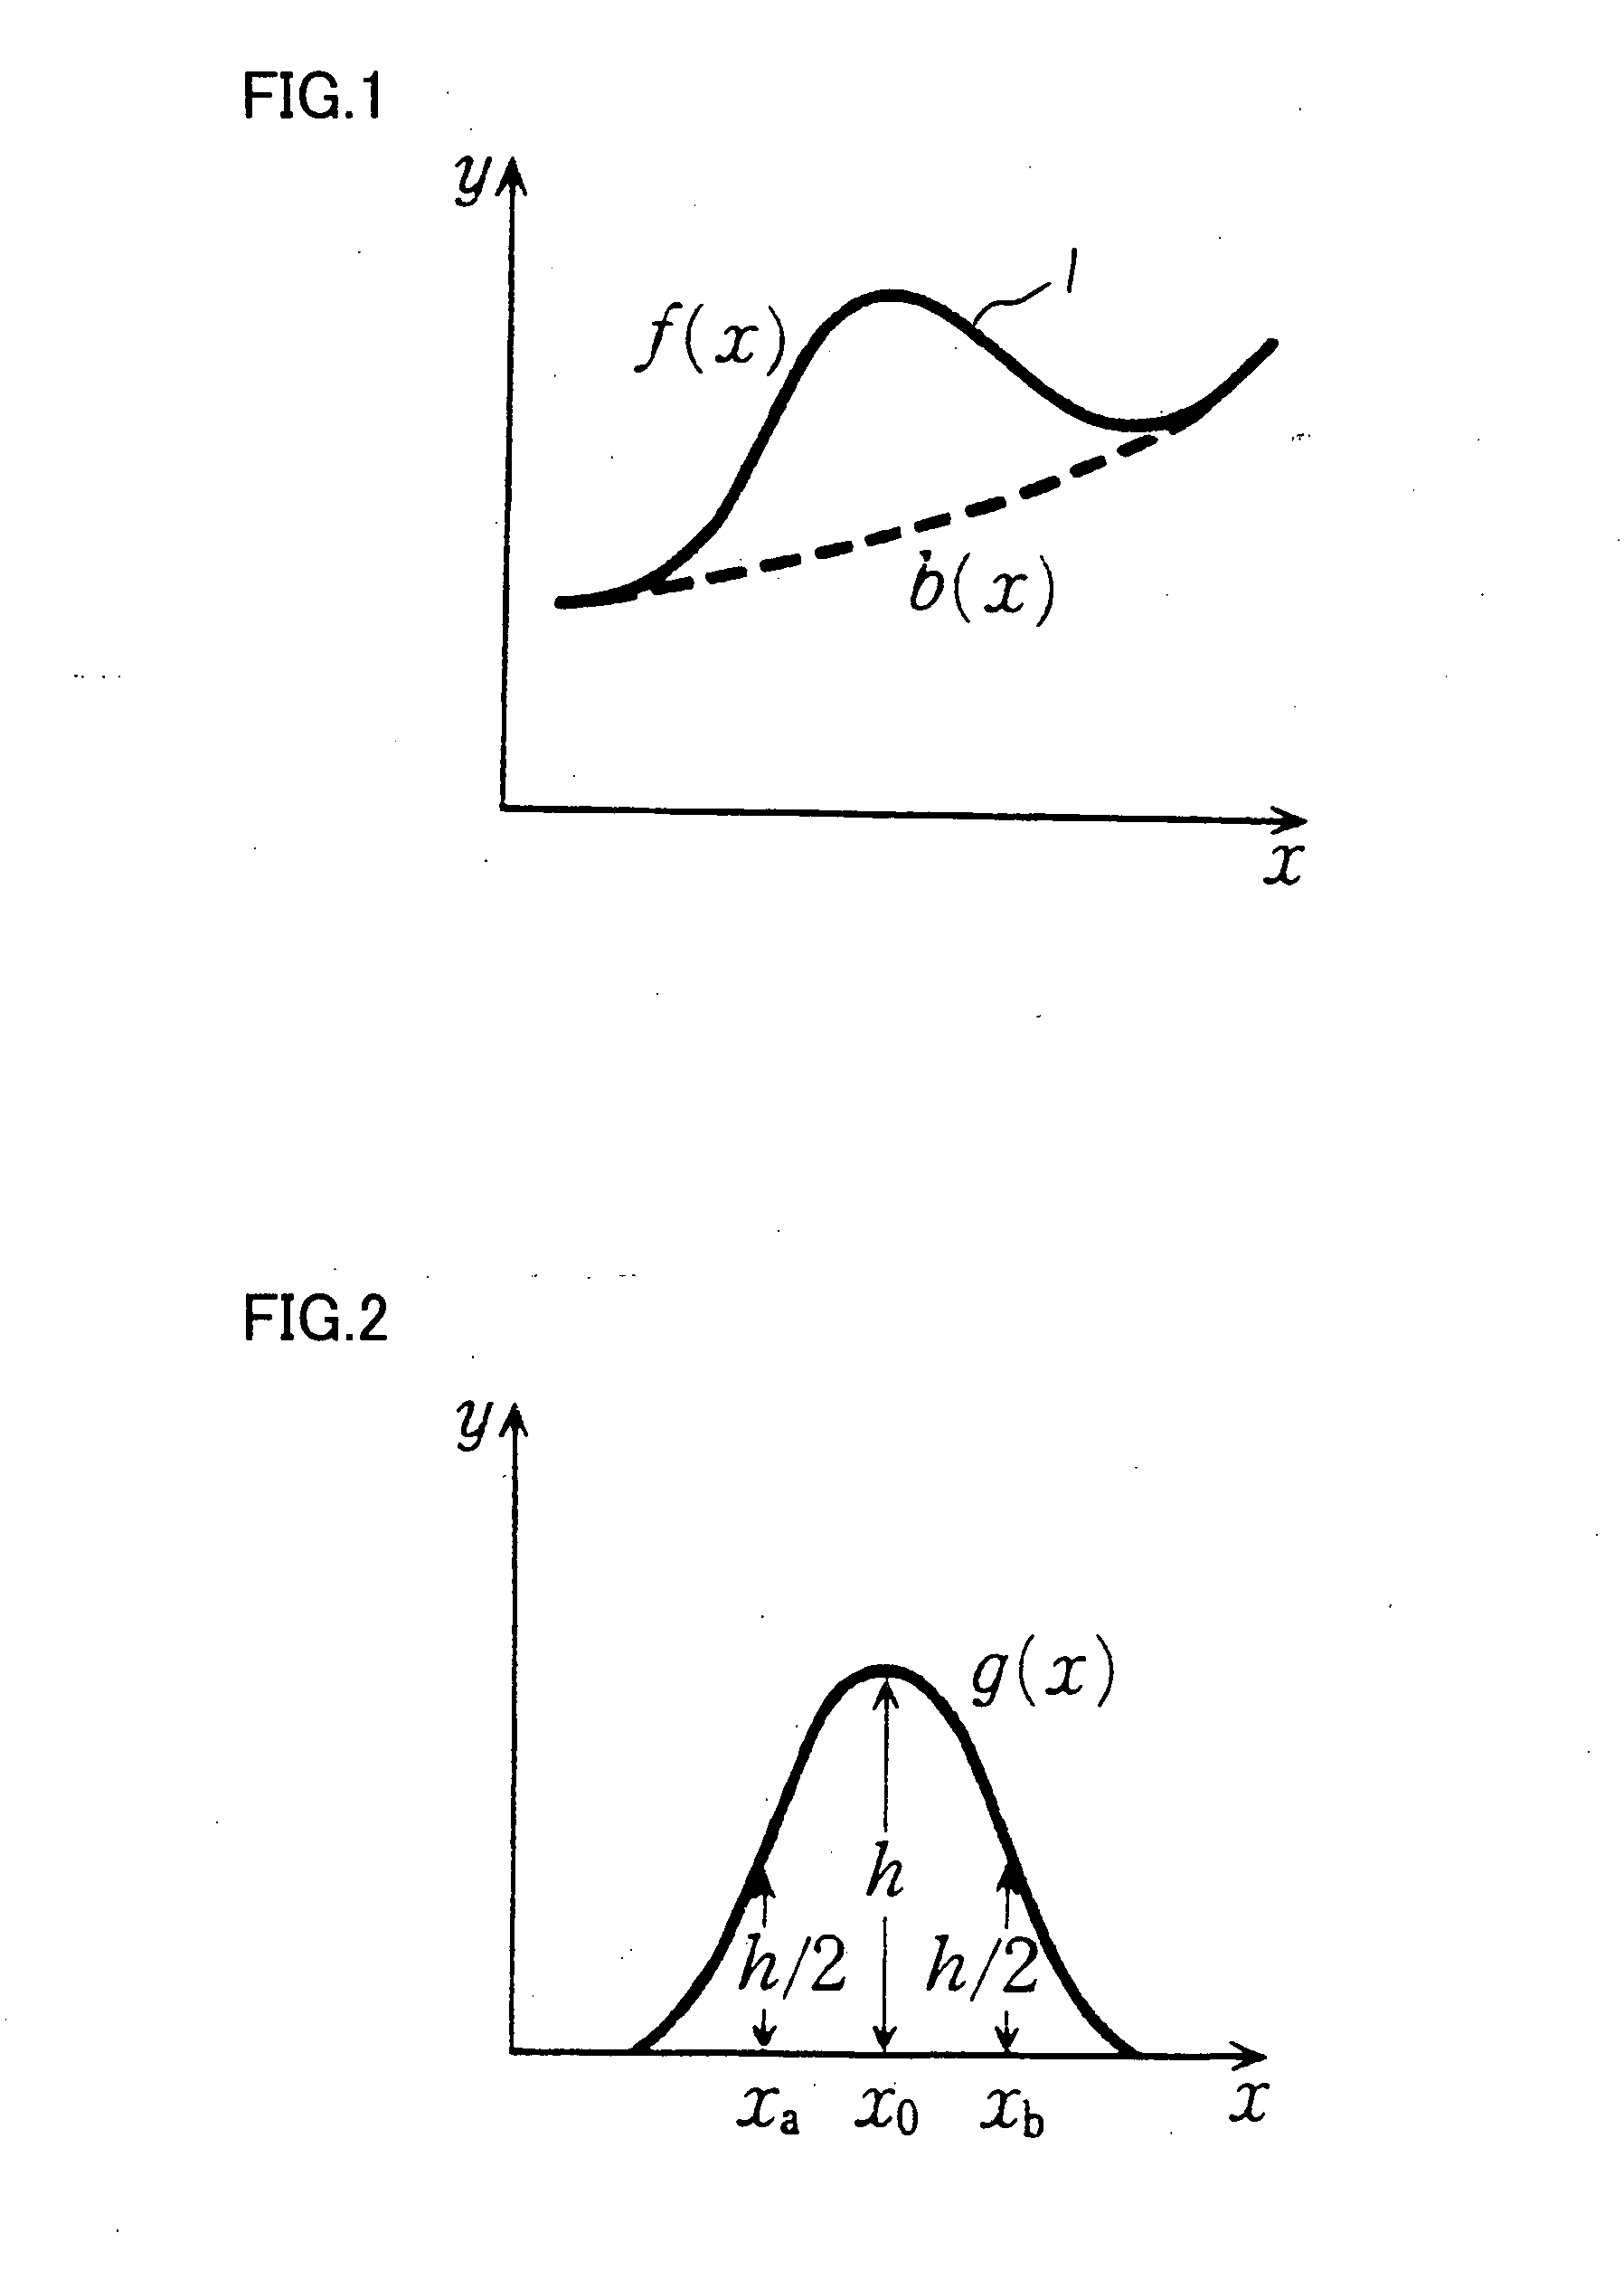 Solid electrolyte and method of producing the same